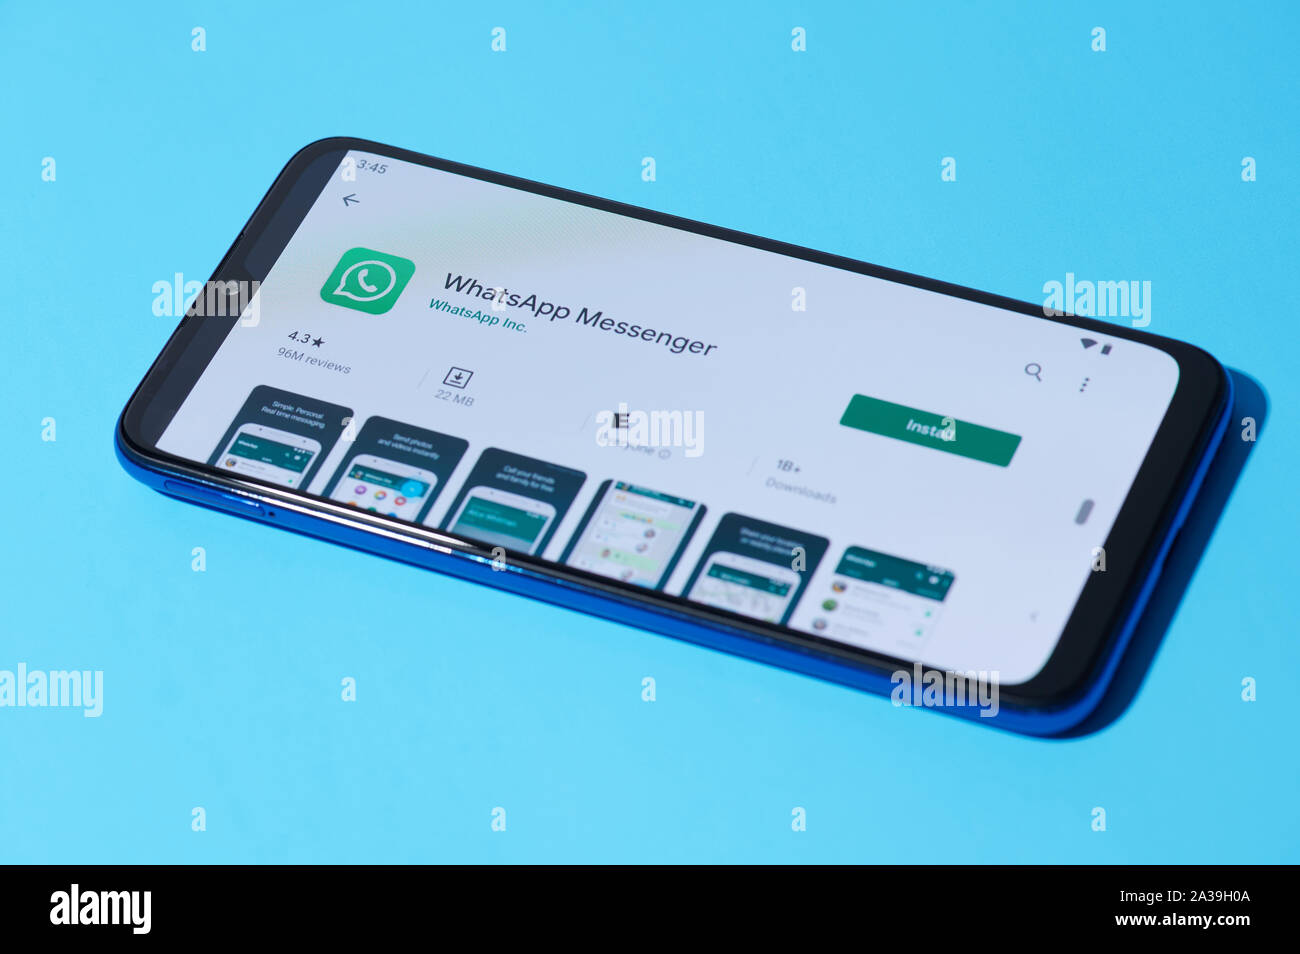 New york, USA - september 28, 2019:Installing mobile whatsapp app on smartphone screen close up view Stock Photo